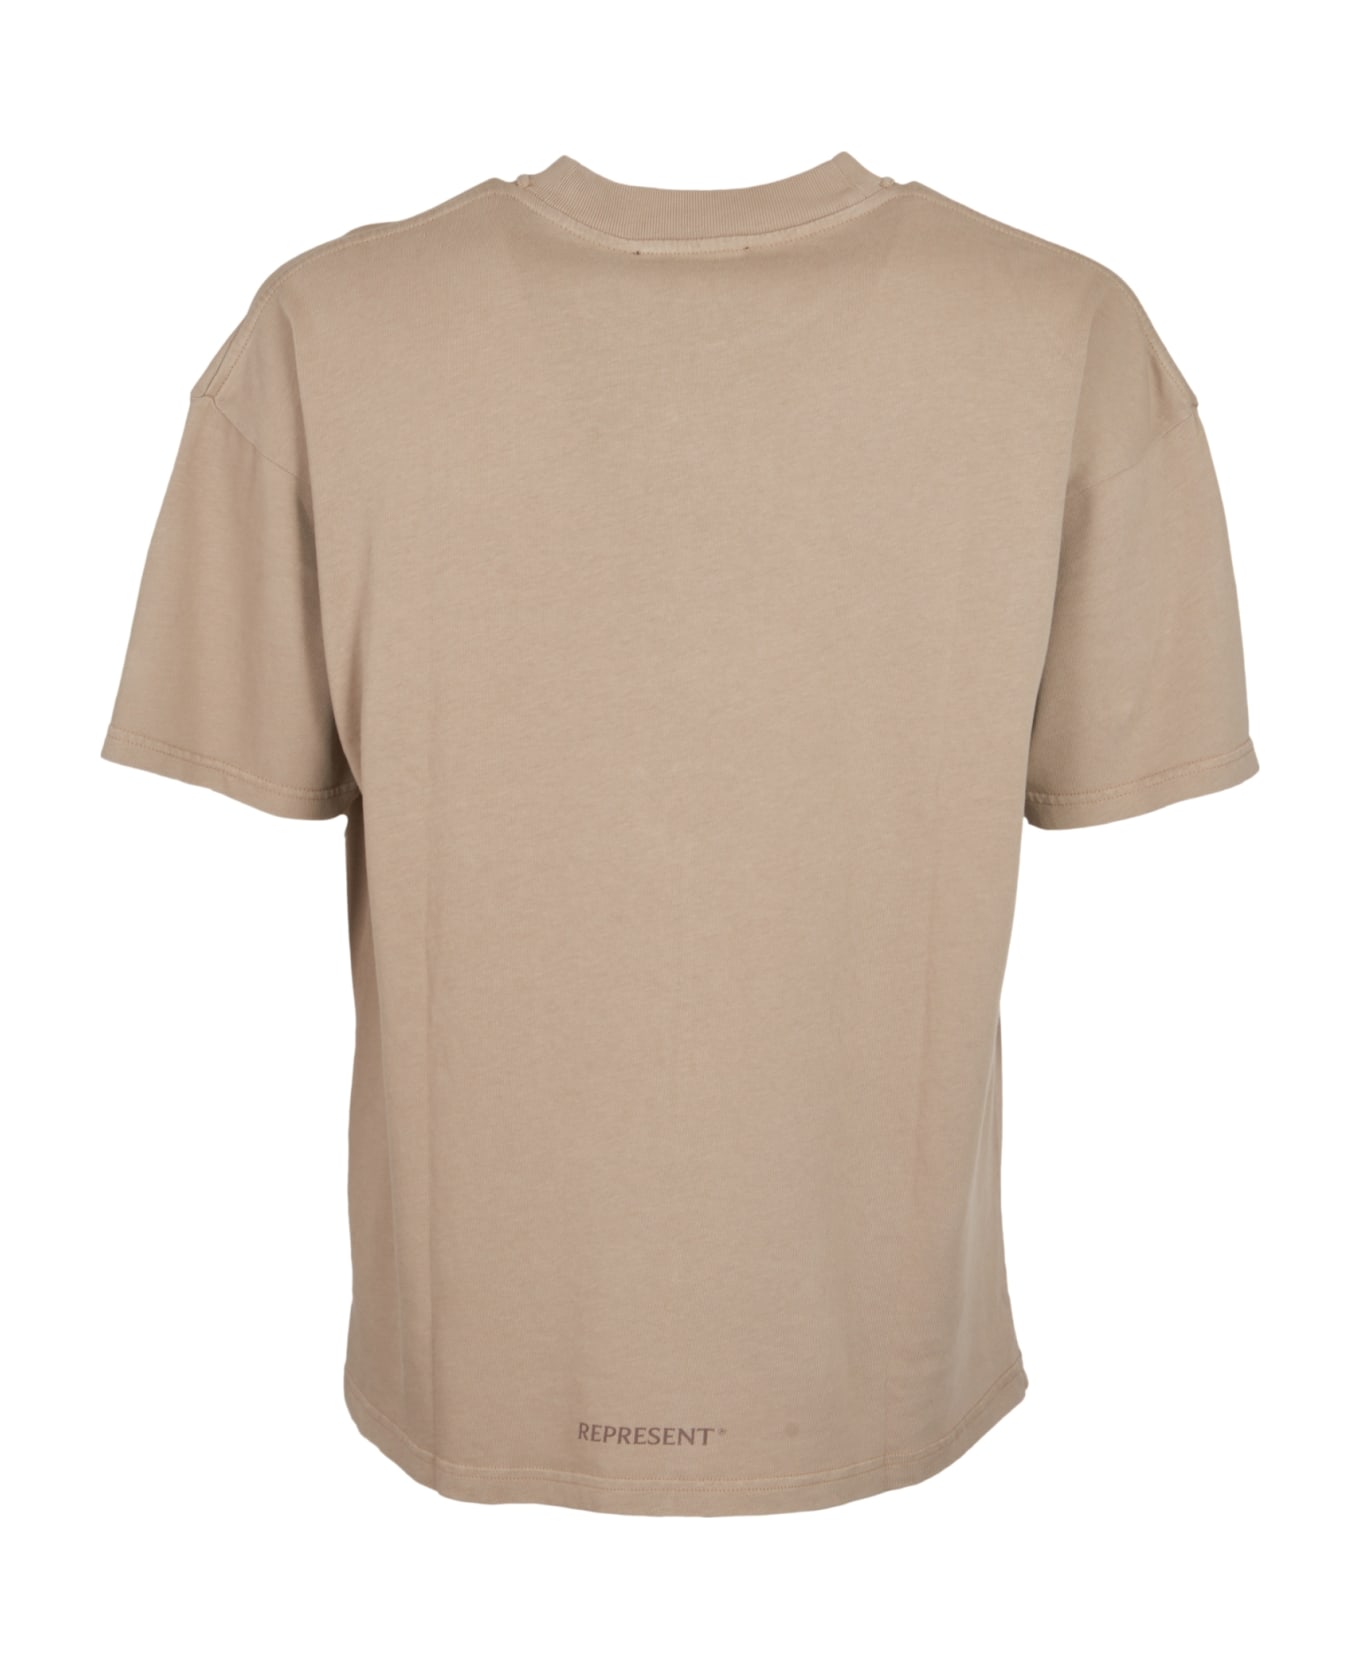 REPRESENT Horizons T-shirt - Washed Taupe シャツ